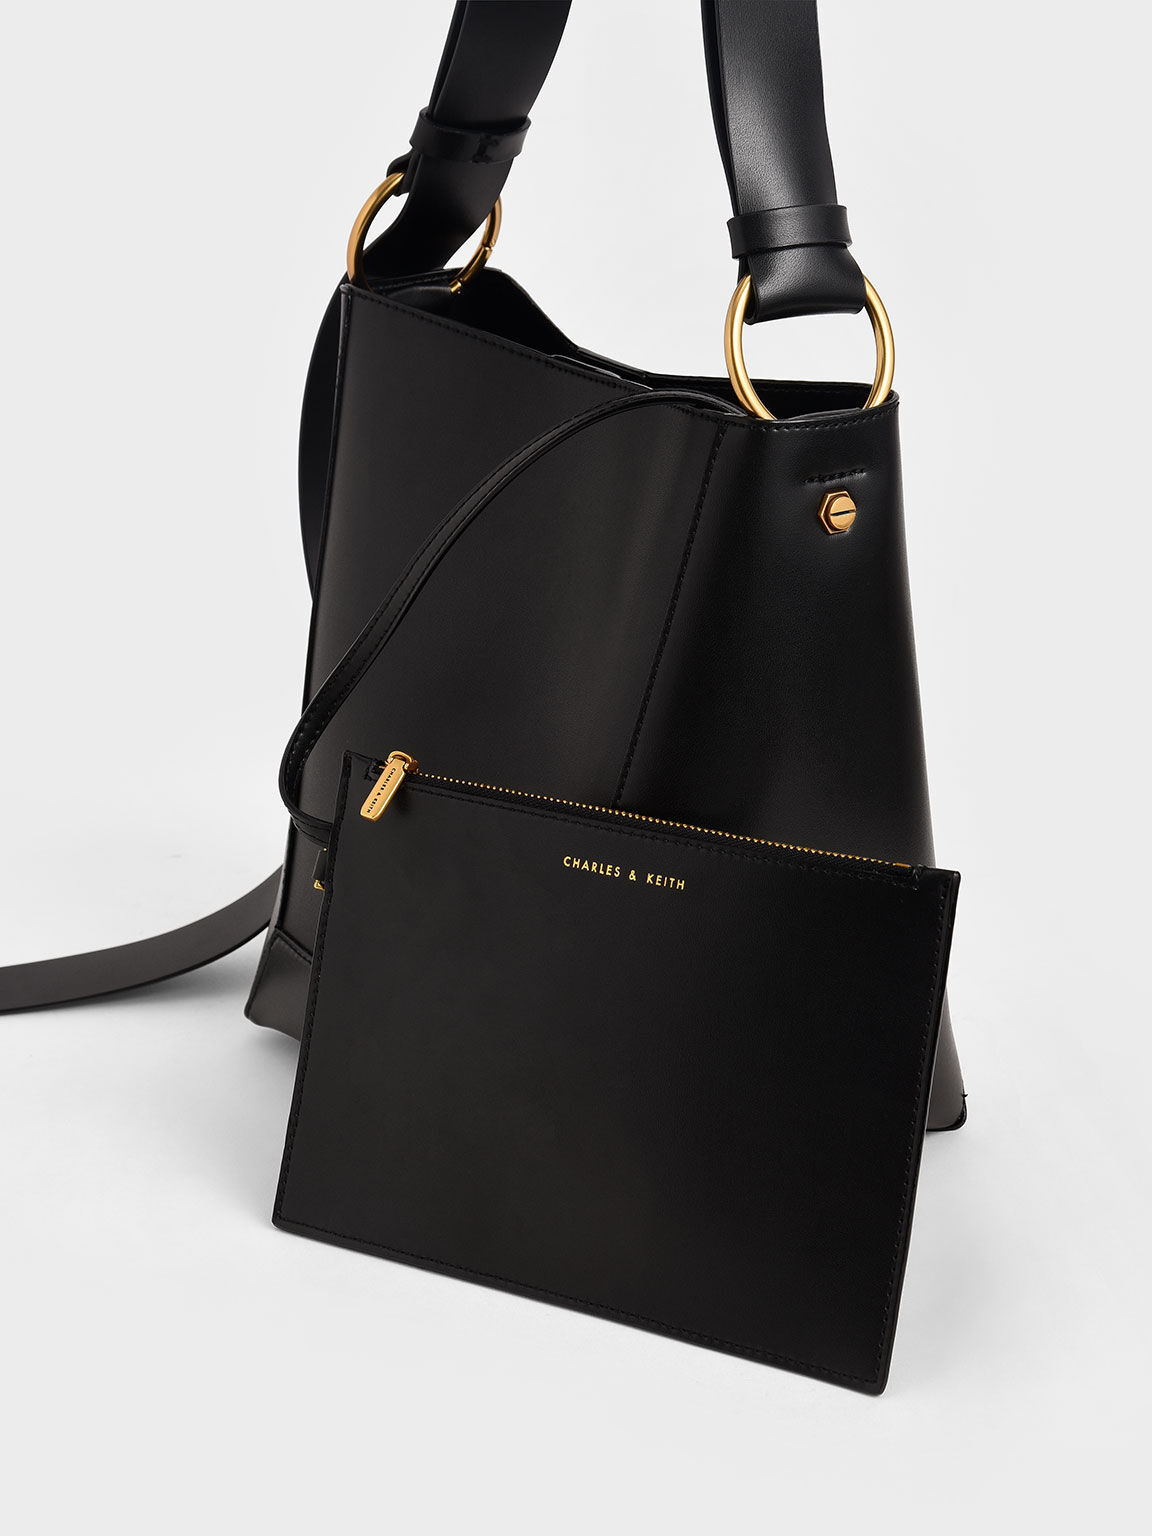 Women’s Shoulder Bags Online Sale - CHARLES & KEITH TH